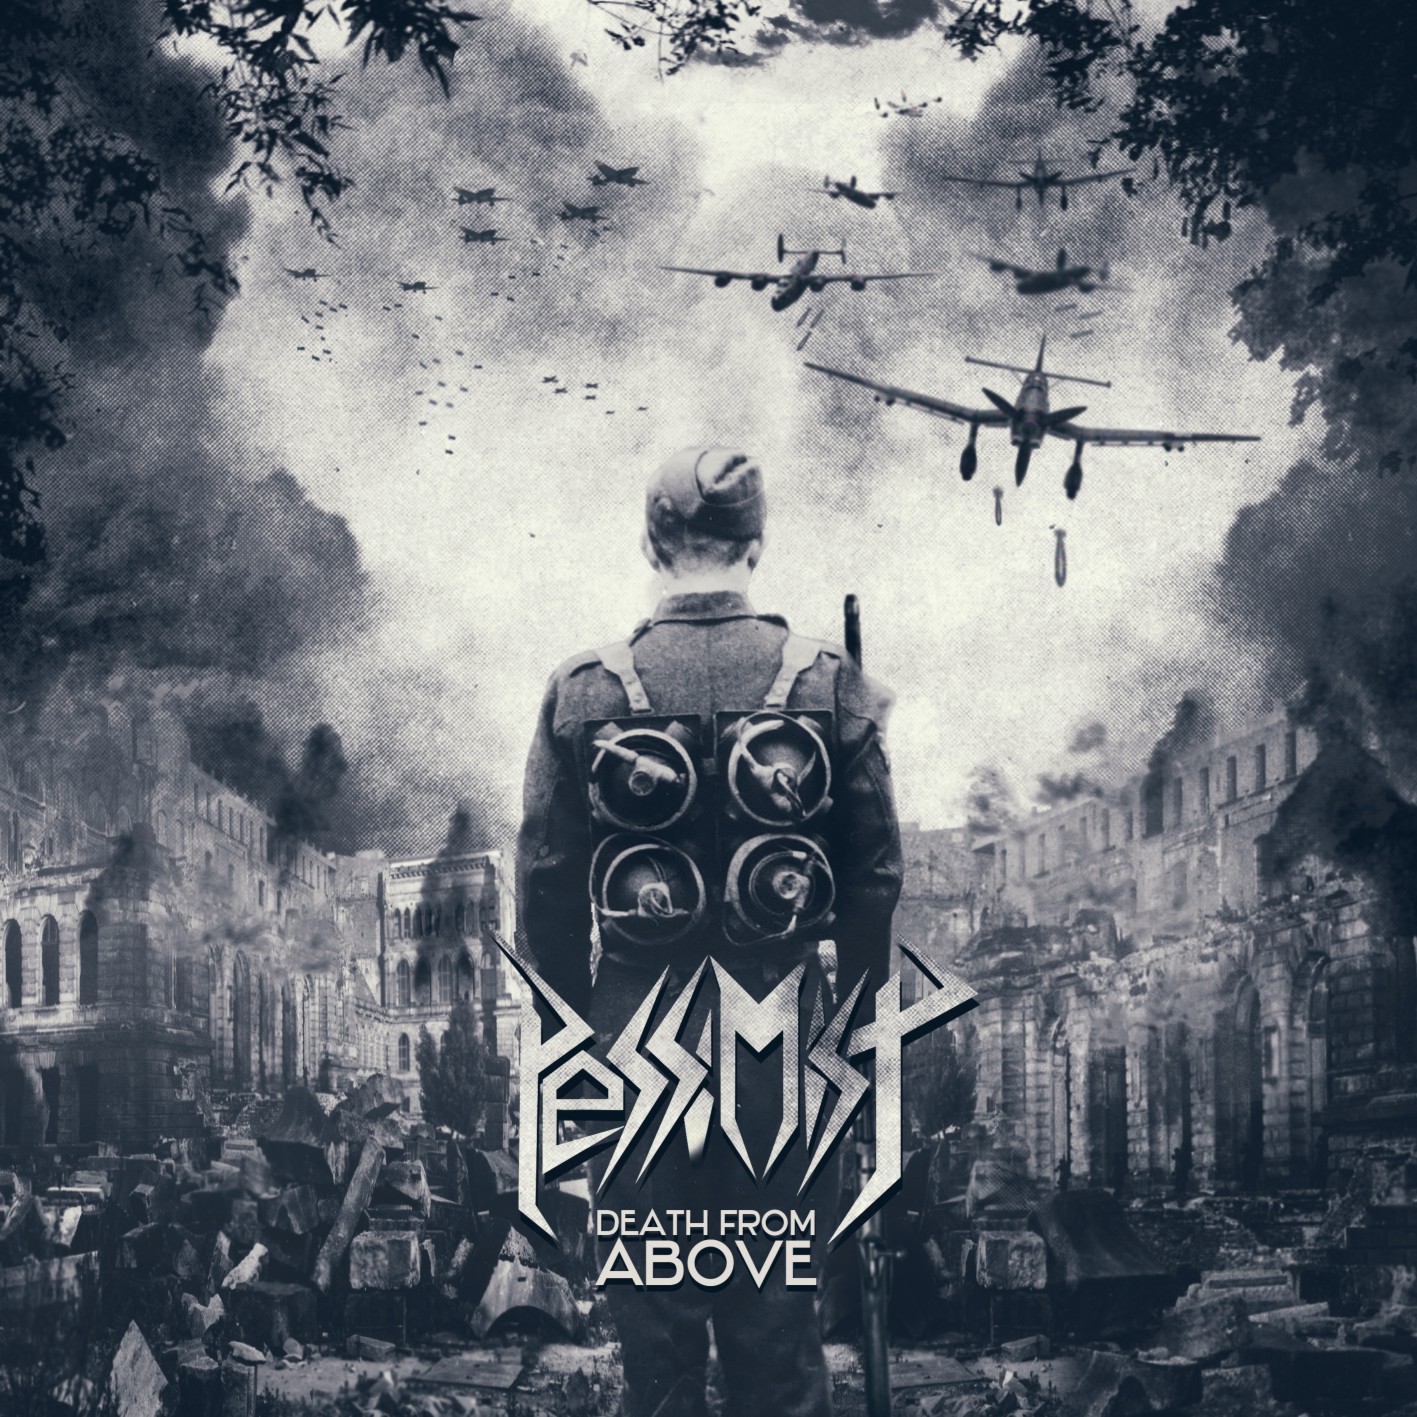 Pessimist – Death from Above Review